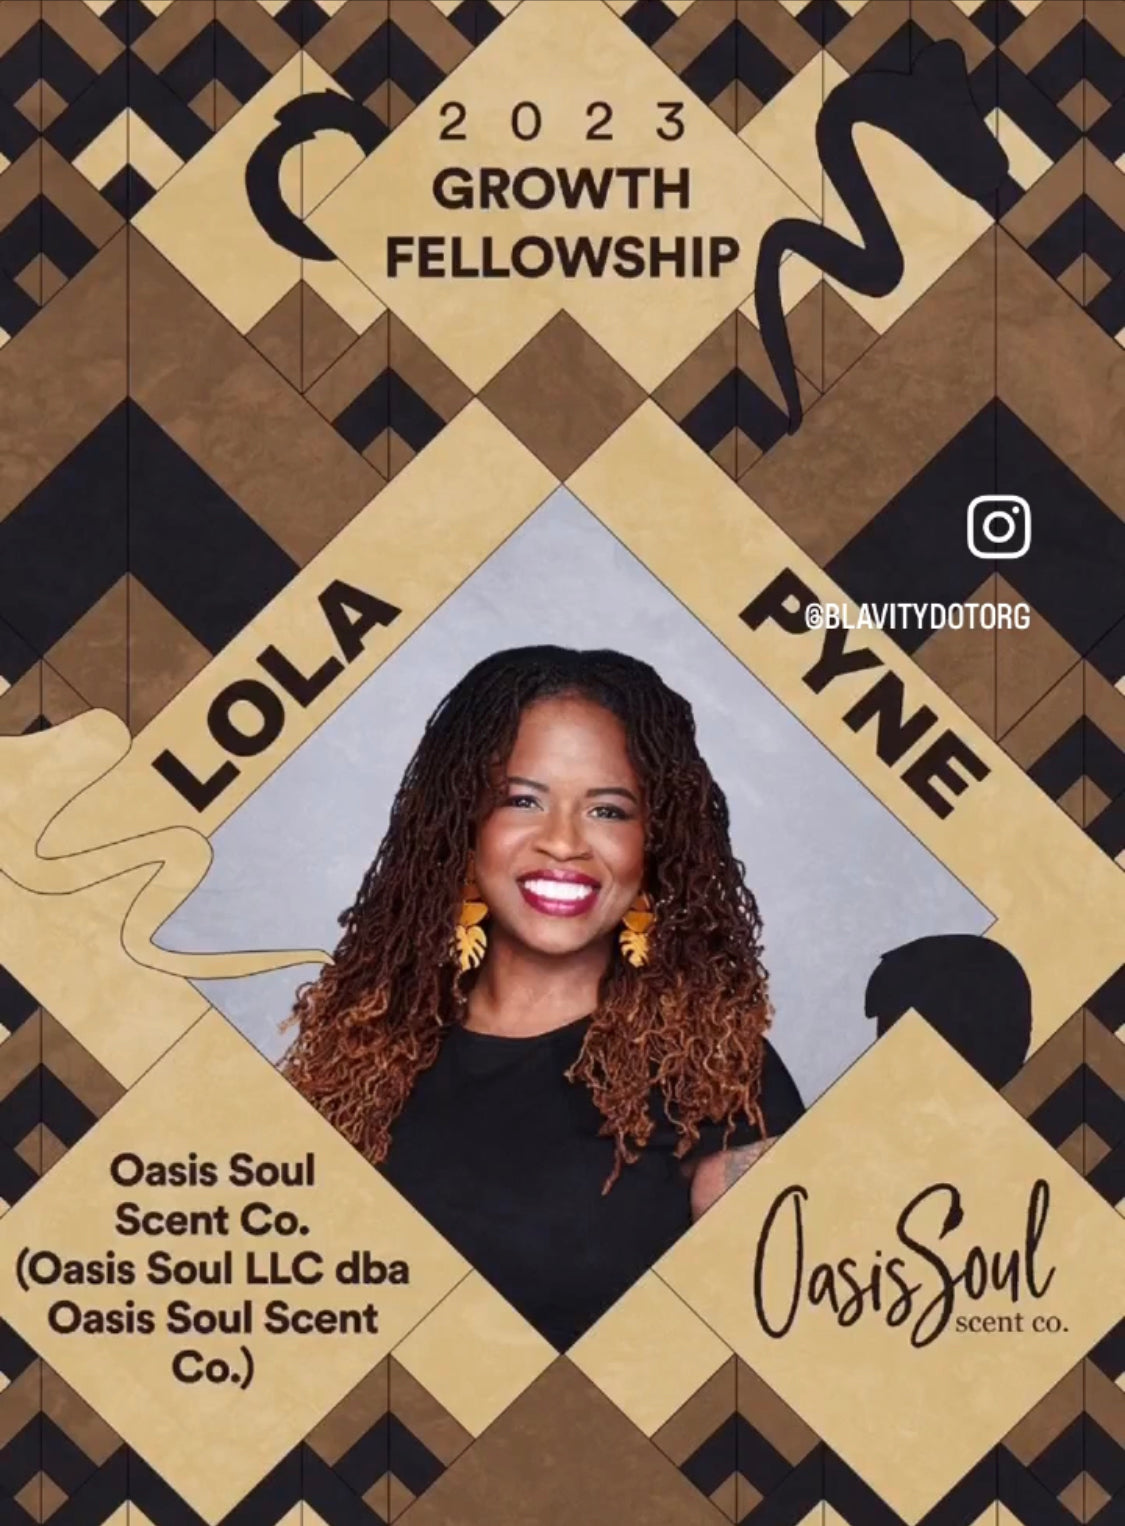 Lola Pyne of Oasis Soul Scent Co., Joins the 2023 Blavity.org Growth Fellowship Program